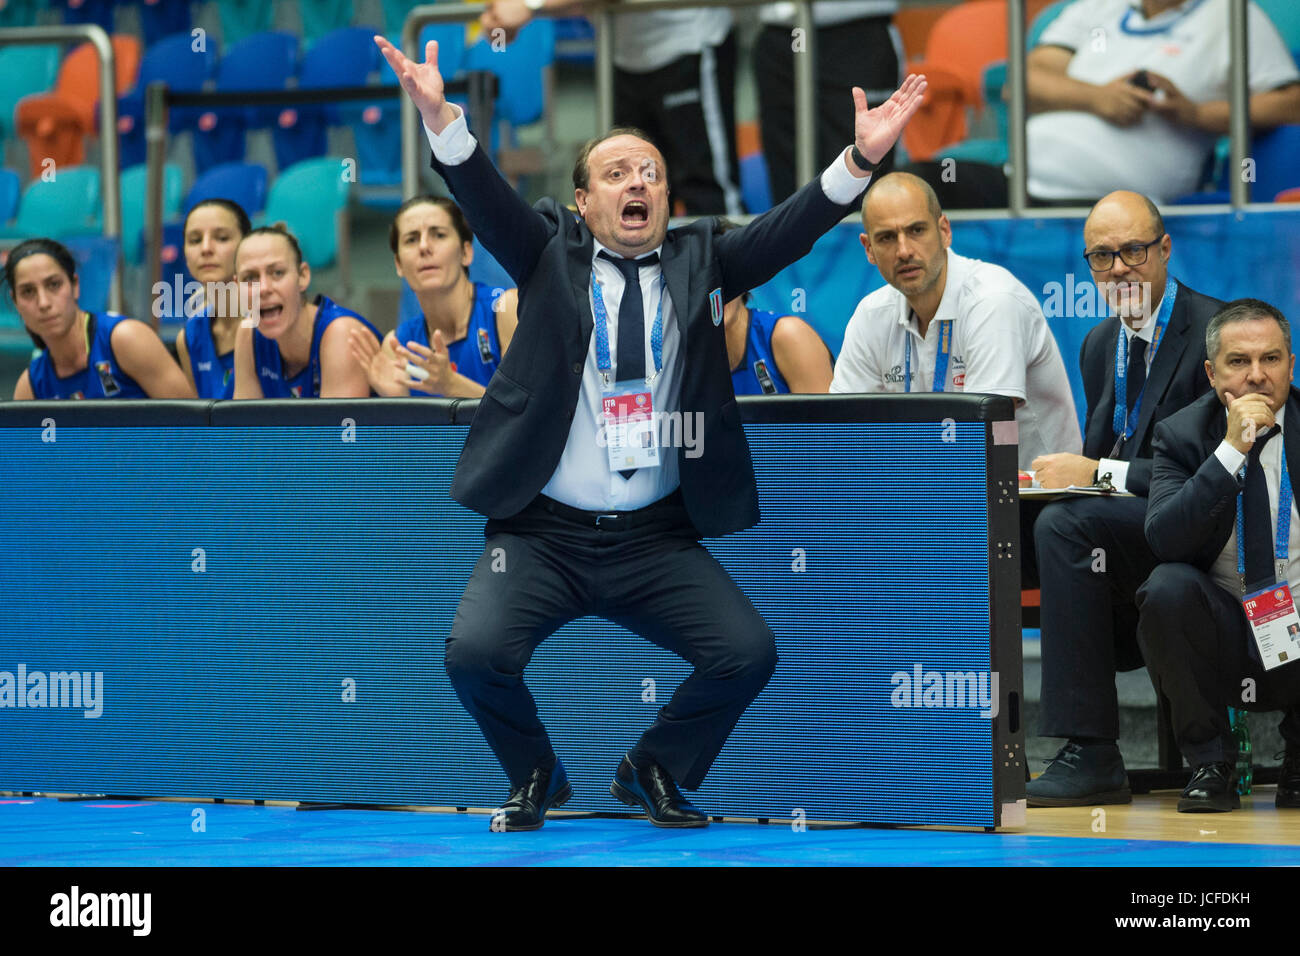 Coach of Italy ANDREA CAPOBIANCO reacts during the FIBA Women's European Basketball Championship match between Belarus and Italy in Hradec Kralove, Czech Republic on June 16, 2017. (CTK Photo/David Tanecek) Stock Photo